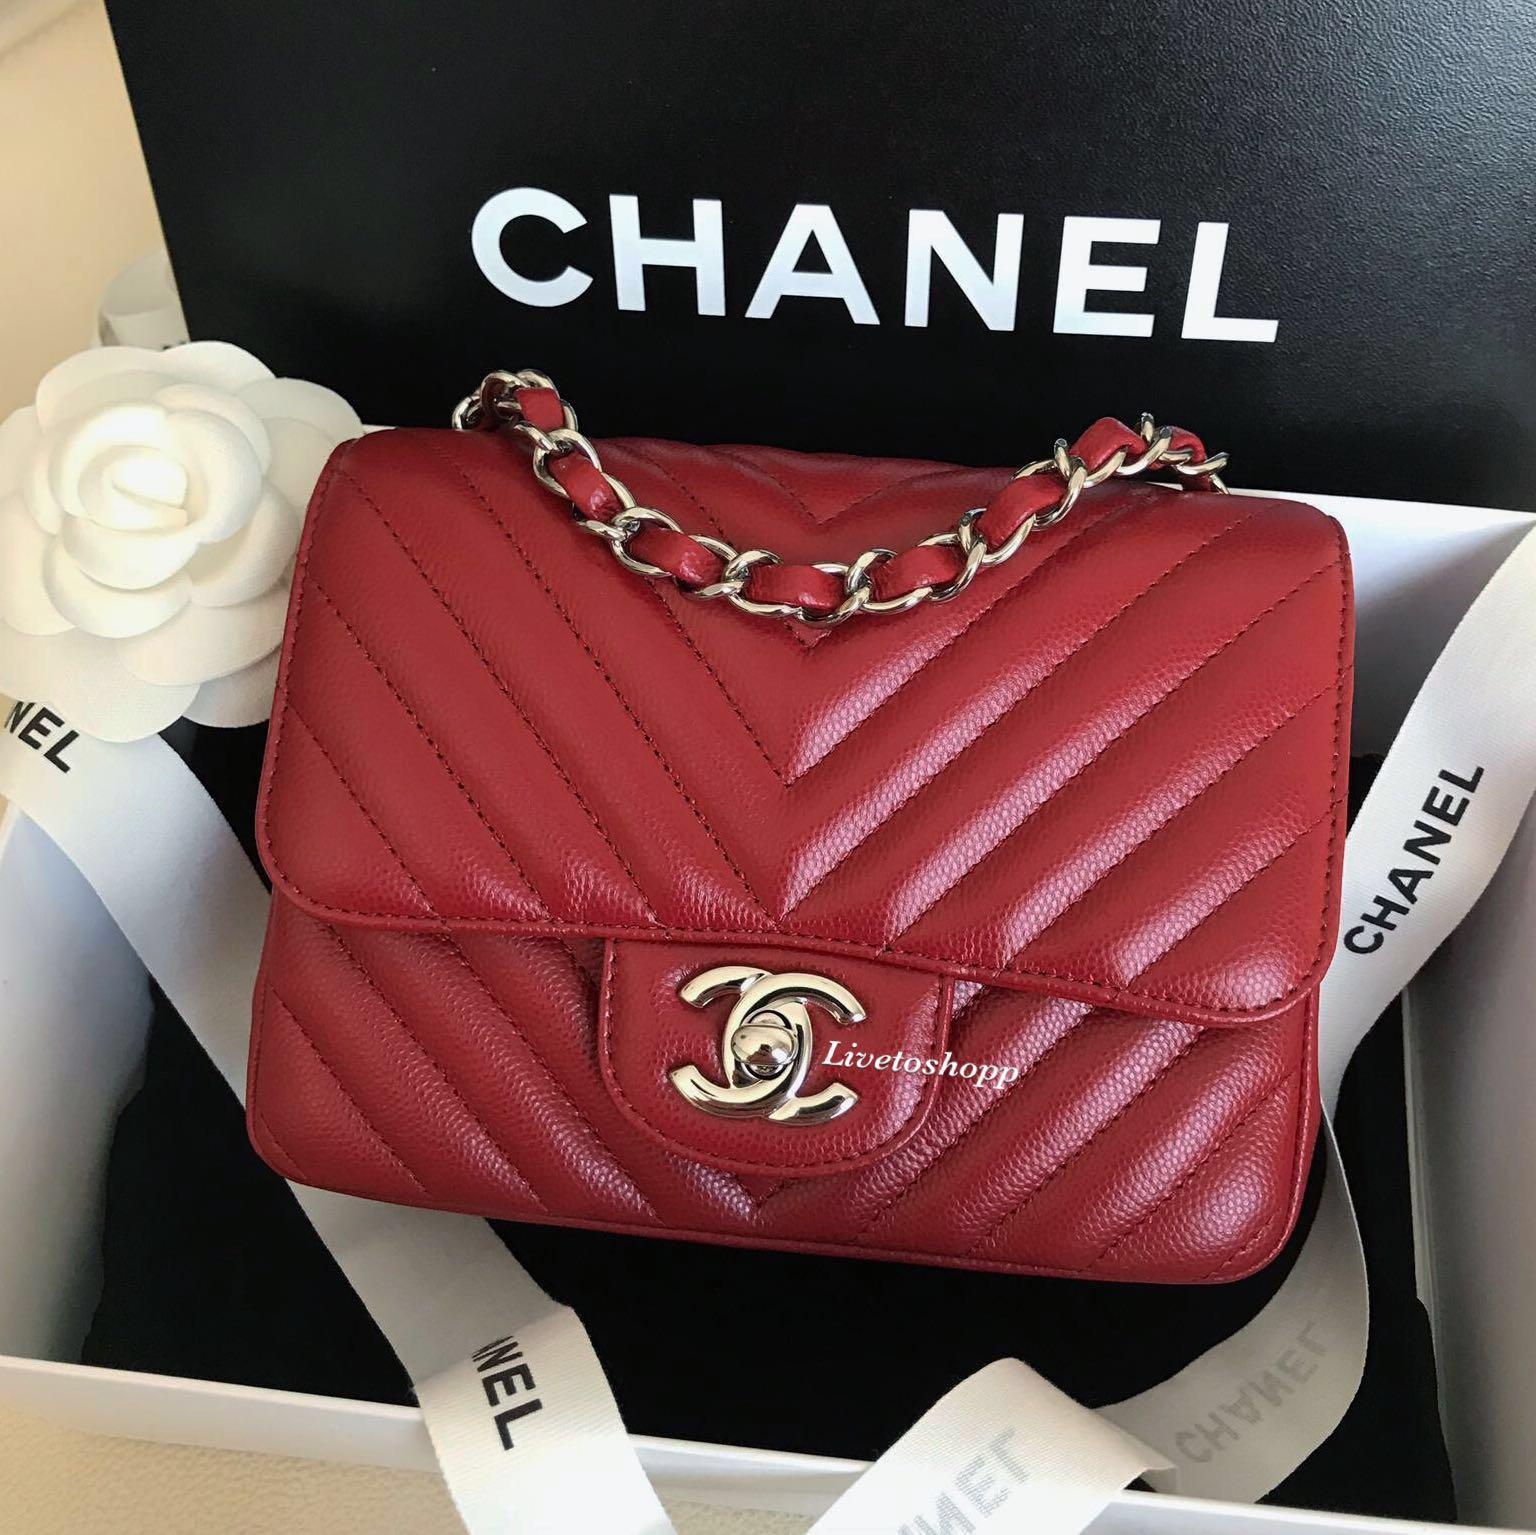 Chanel Mini Rectangle, 17B Red Caviar Leather with Silver Hardware,  Preowned in Dustbag MA001 - Julia Rose Boston